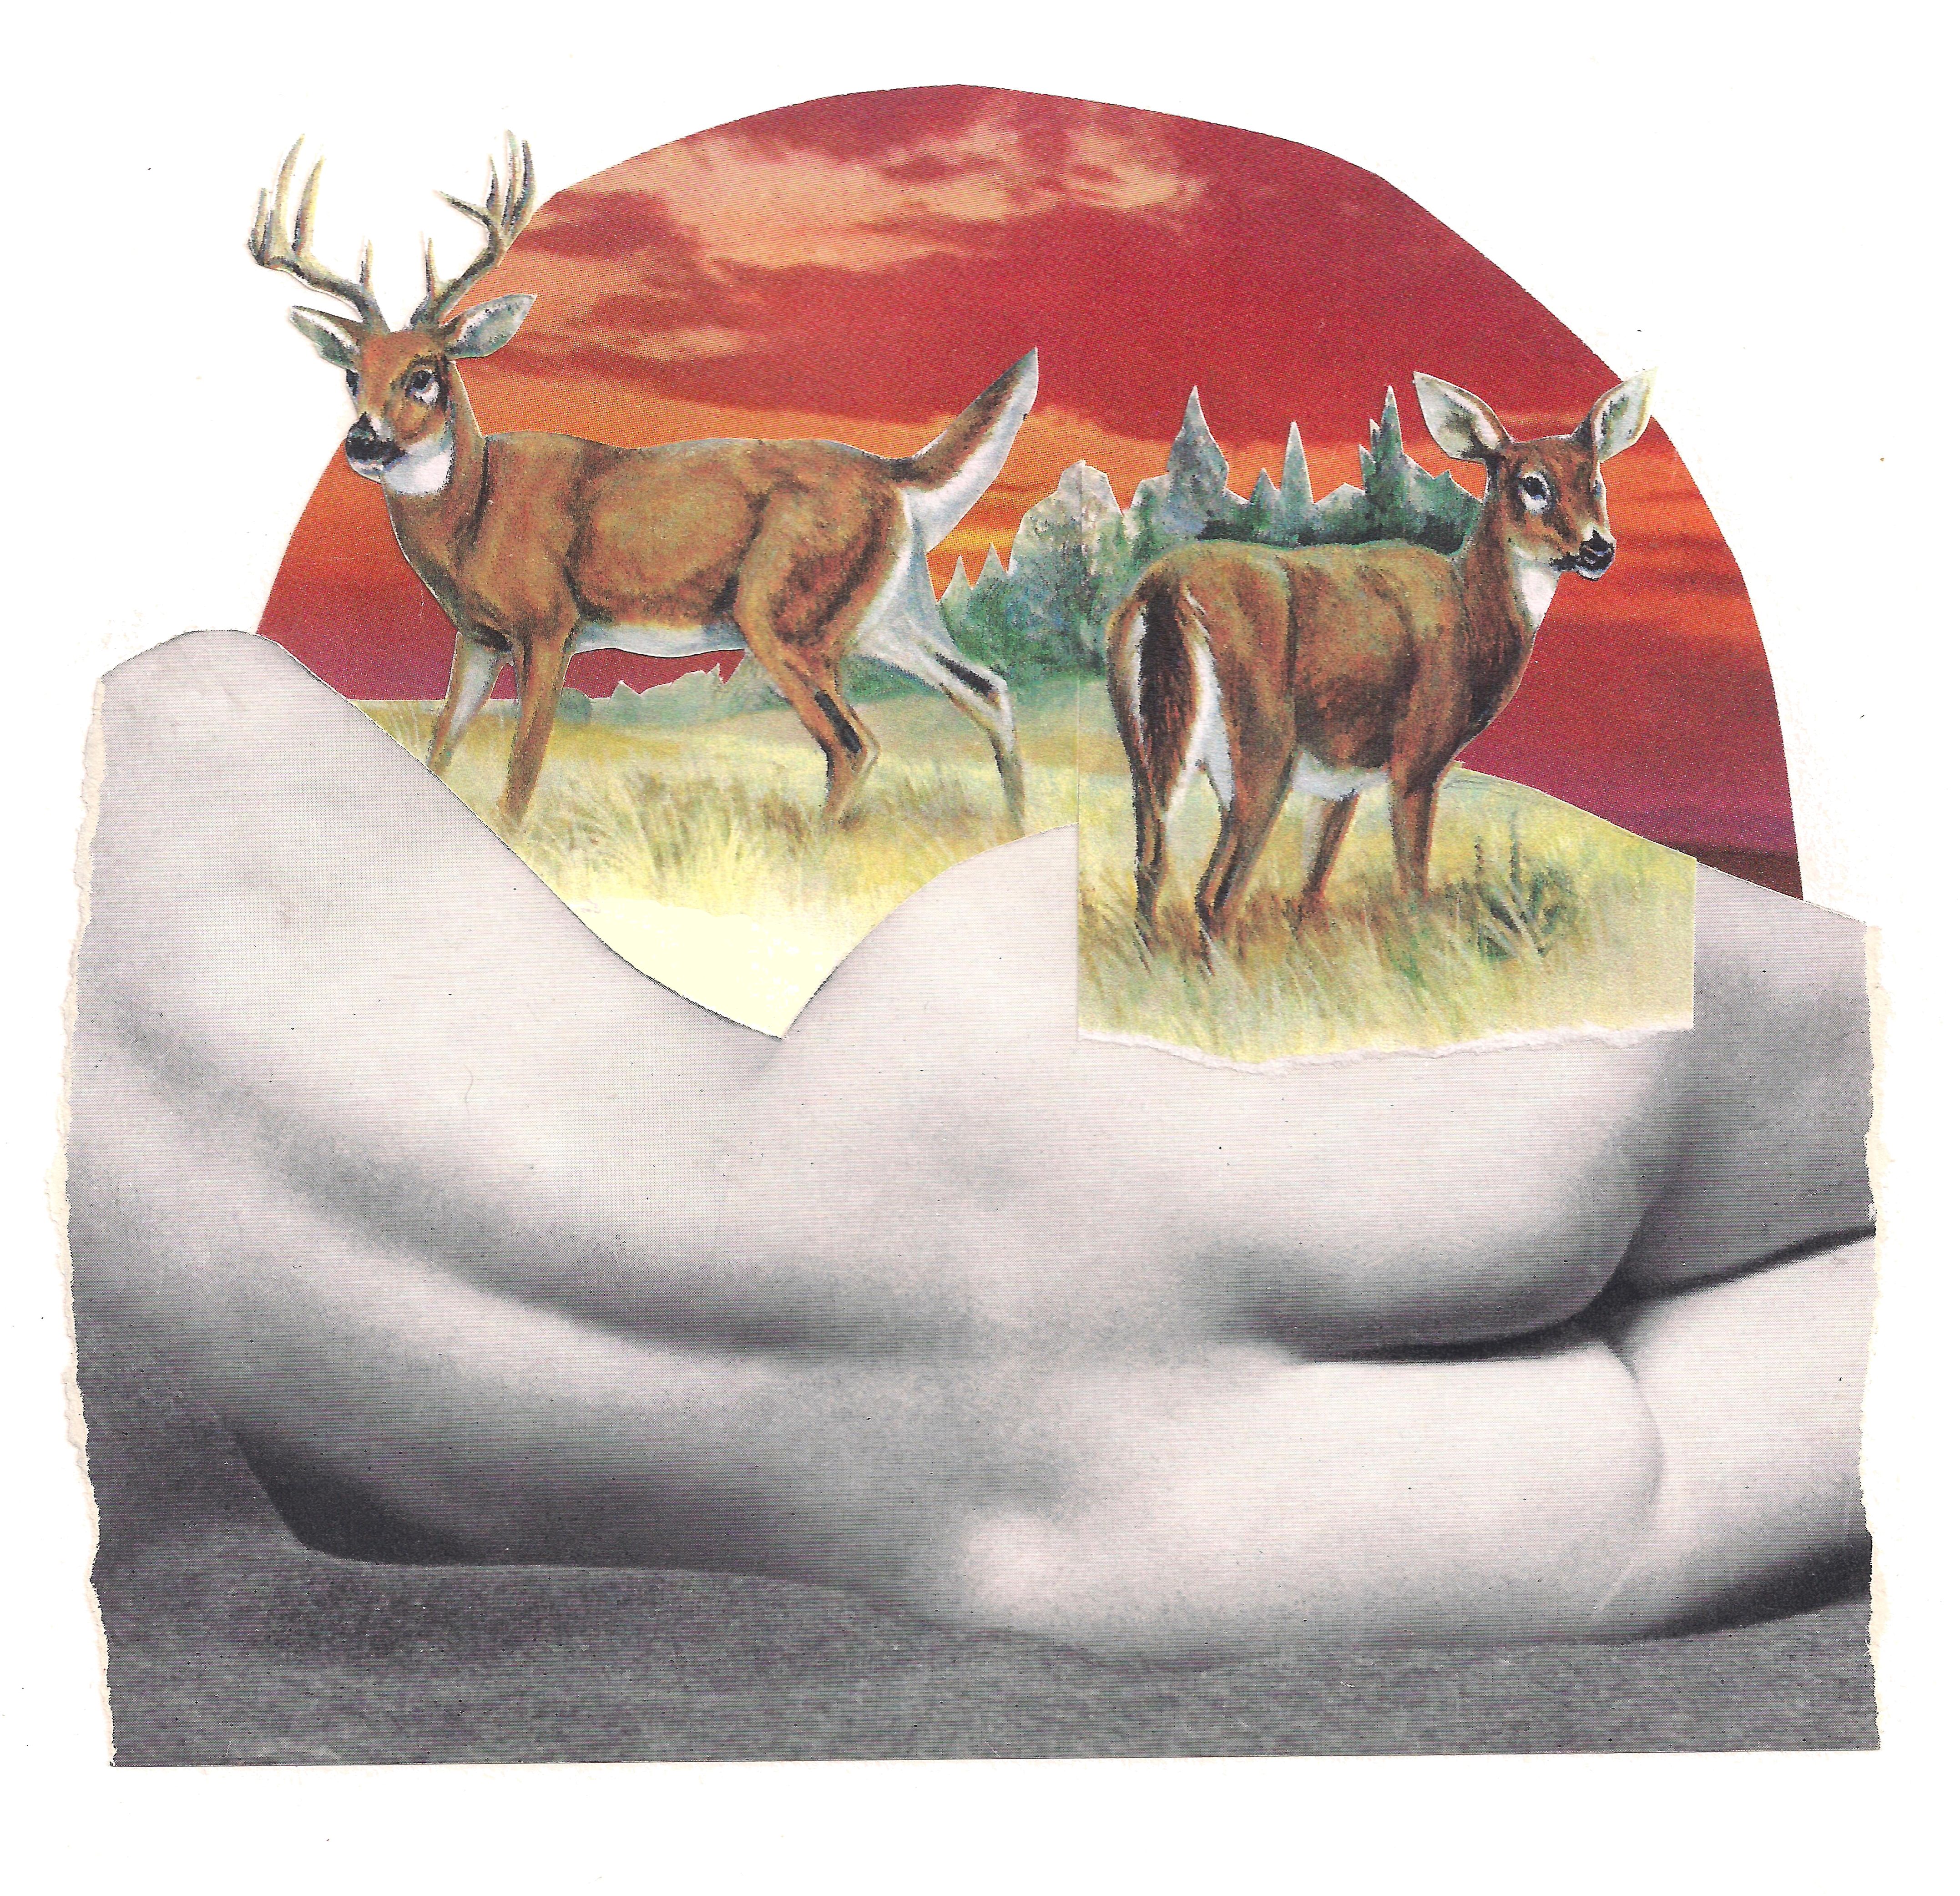 analog collage of an image of a reclining woman's nude back and buttocks, with illustrations of two white-tail deer superimposed onto a red and orange sunset